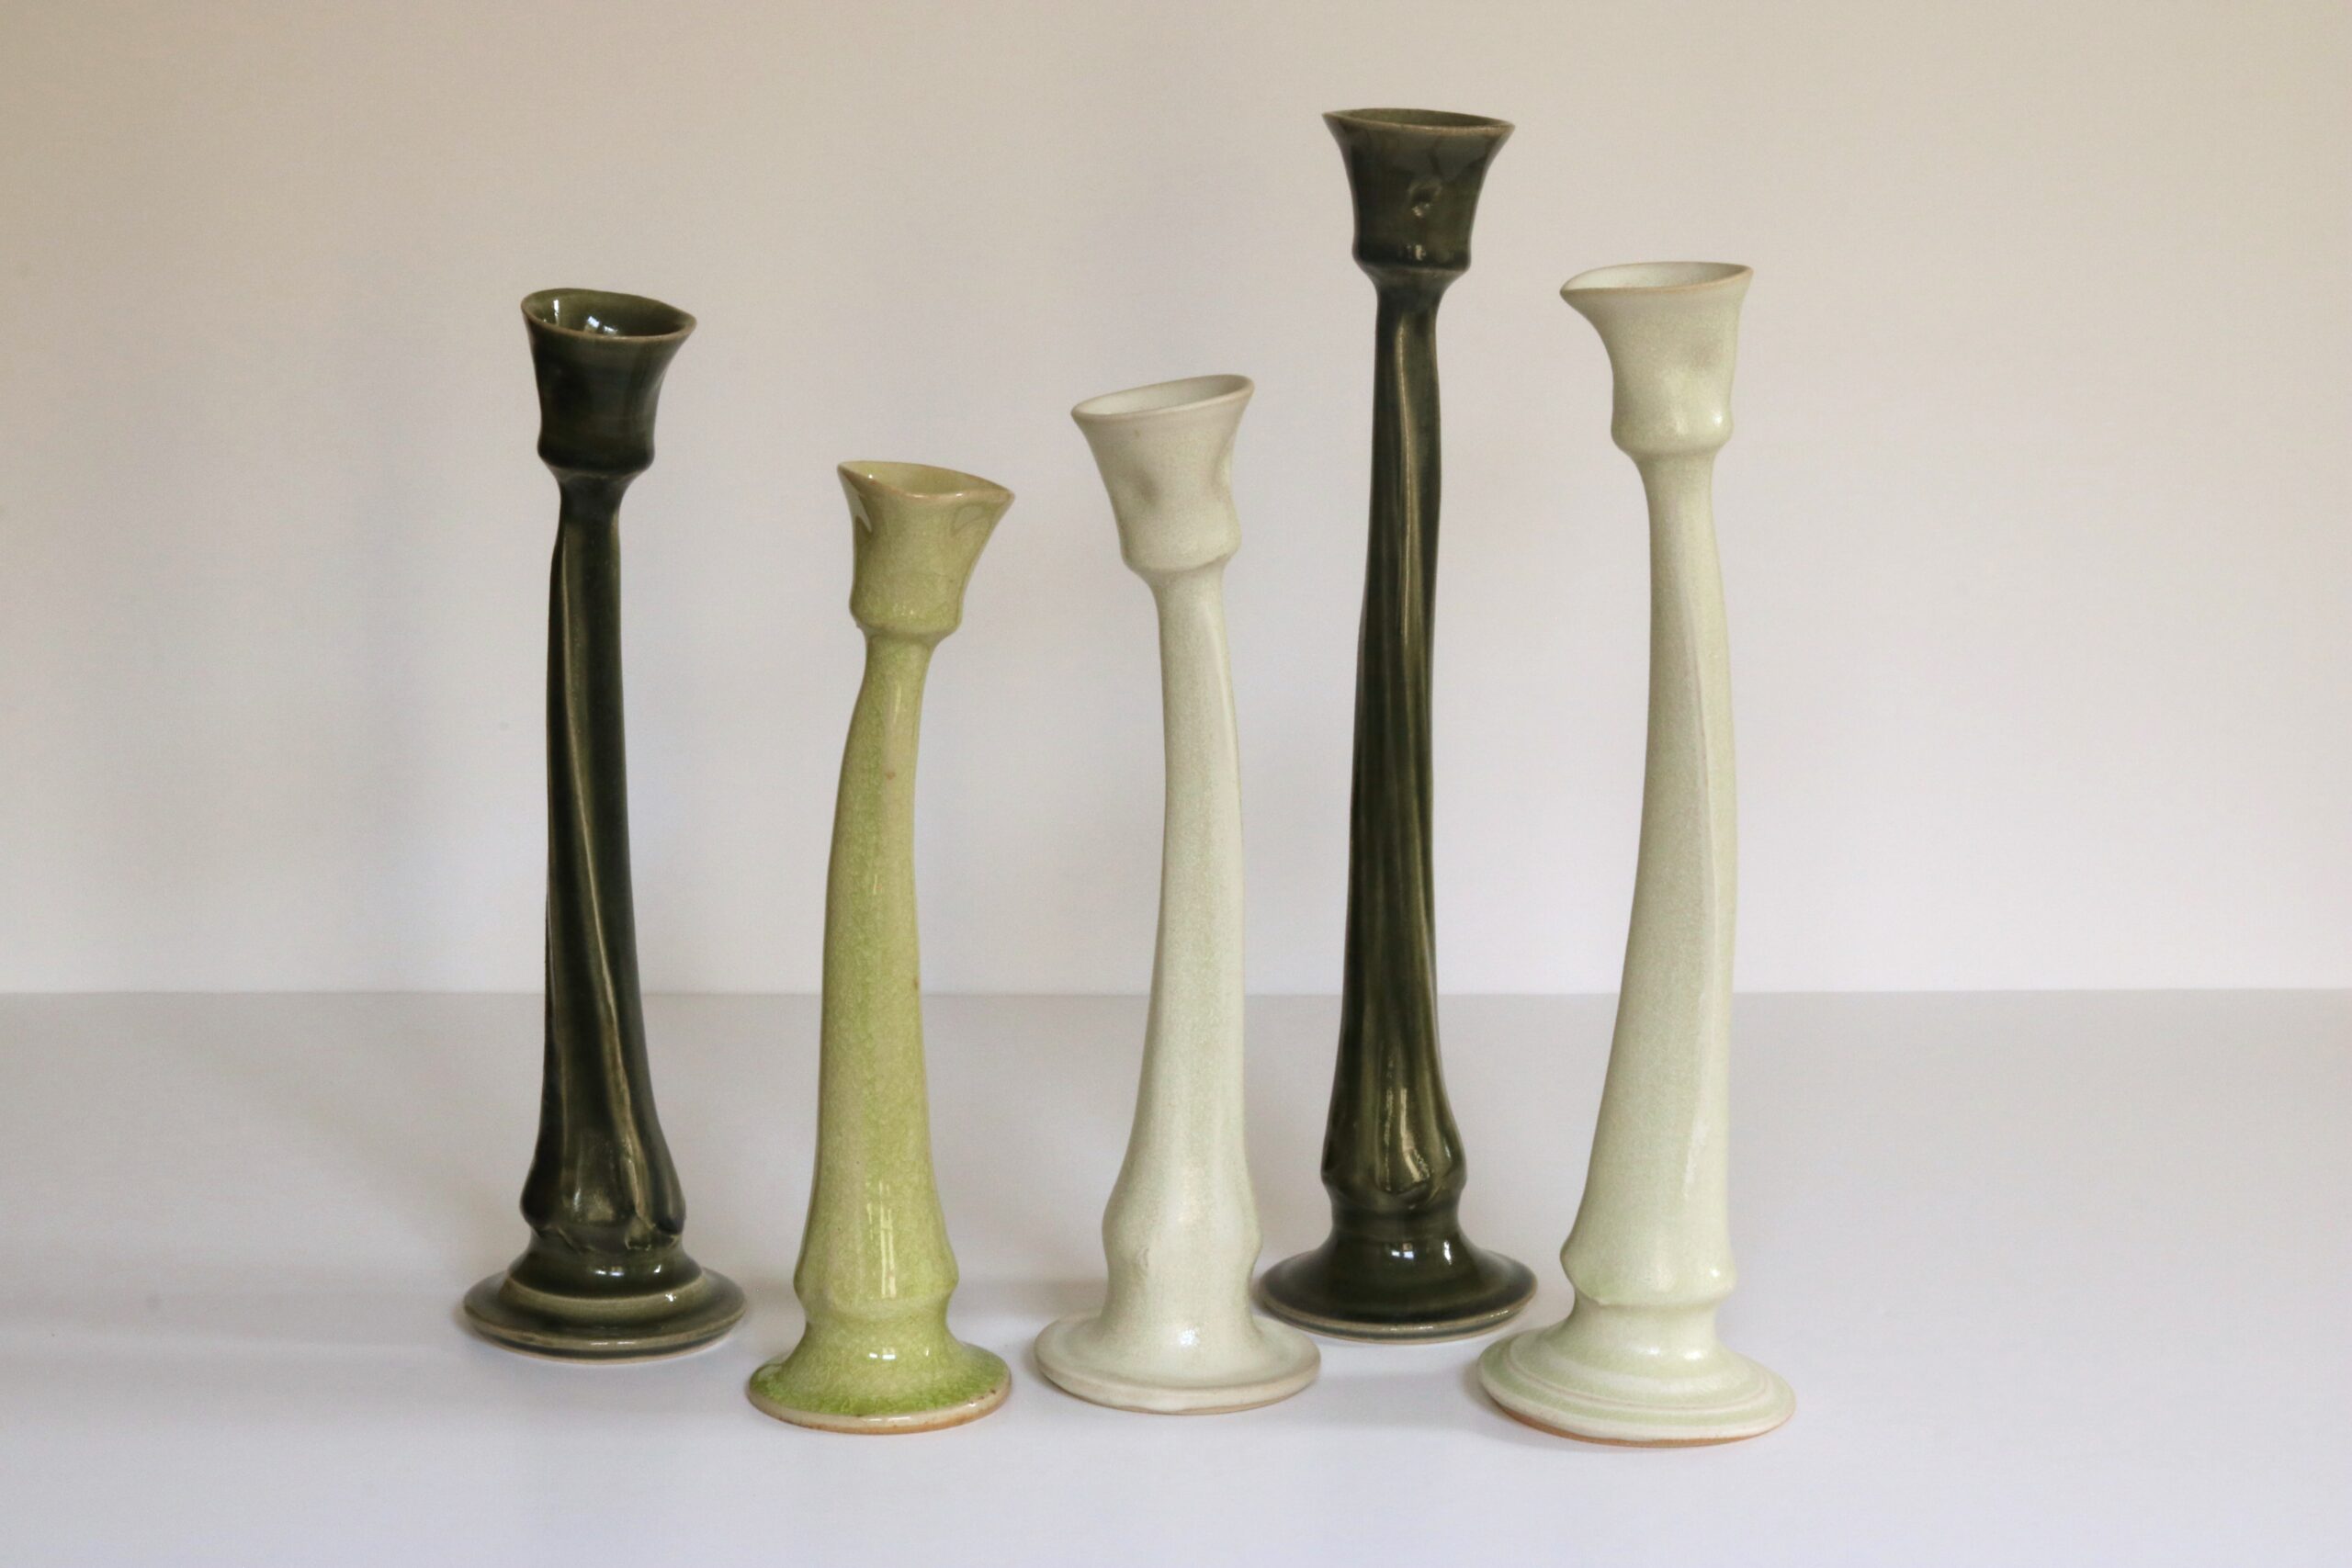 Thrown and altered stoneware, wood
ash green, chartreuse crackle, dolomite, 24 - 33 cm, 2023